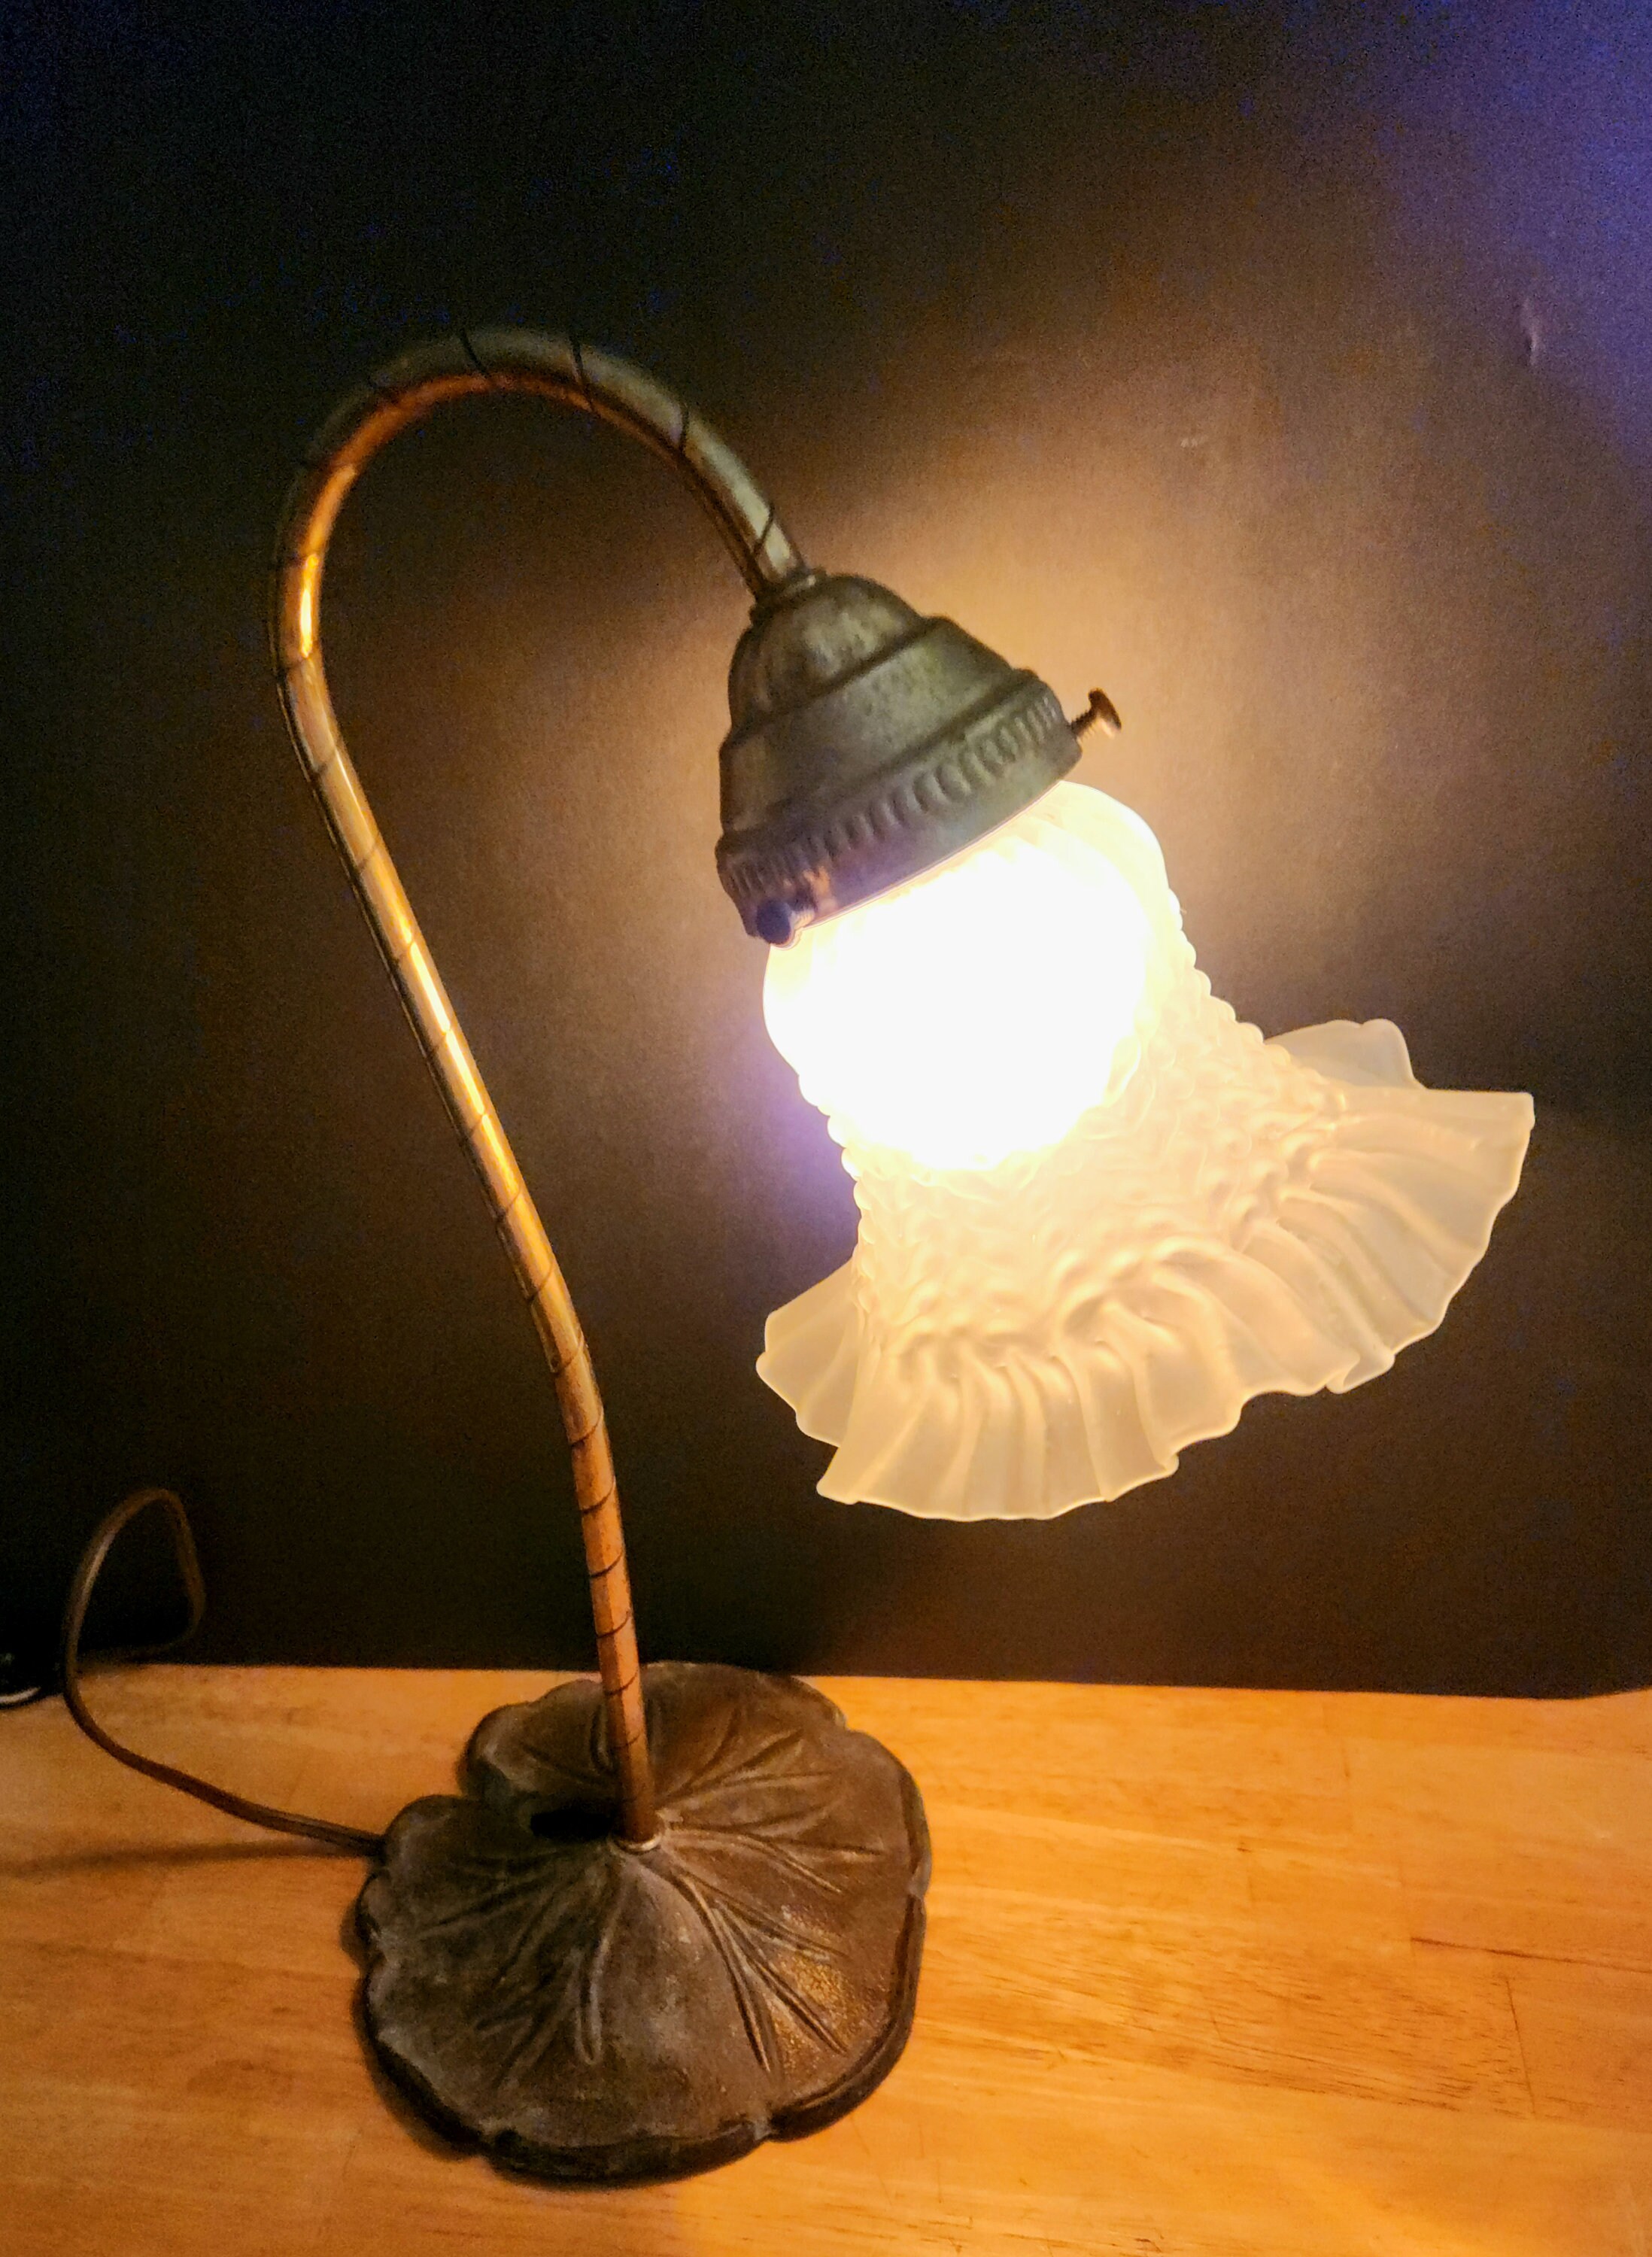 Lumos Neck Light Lamp for Knitting, Crochet and All Crafts 